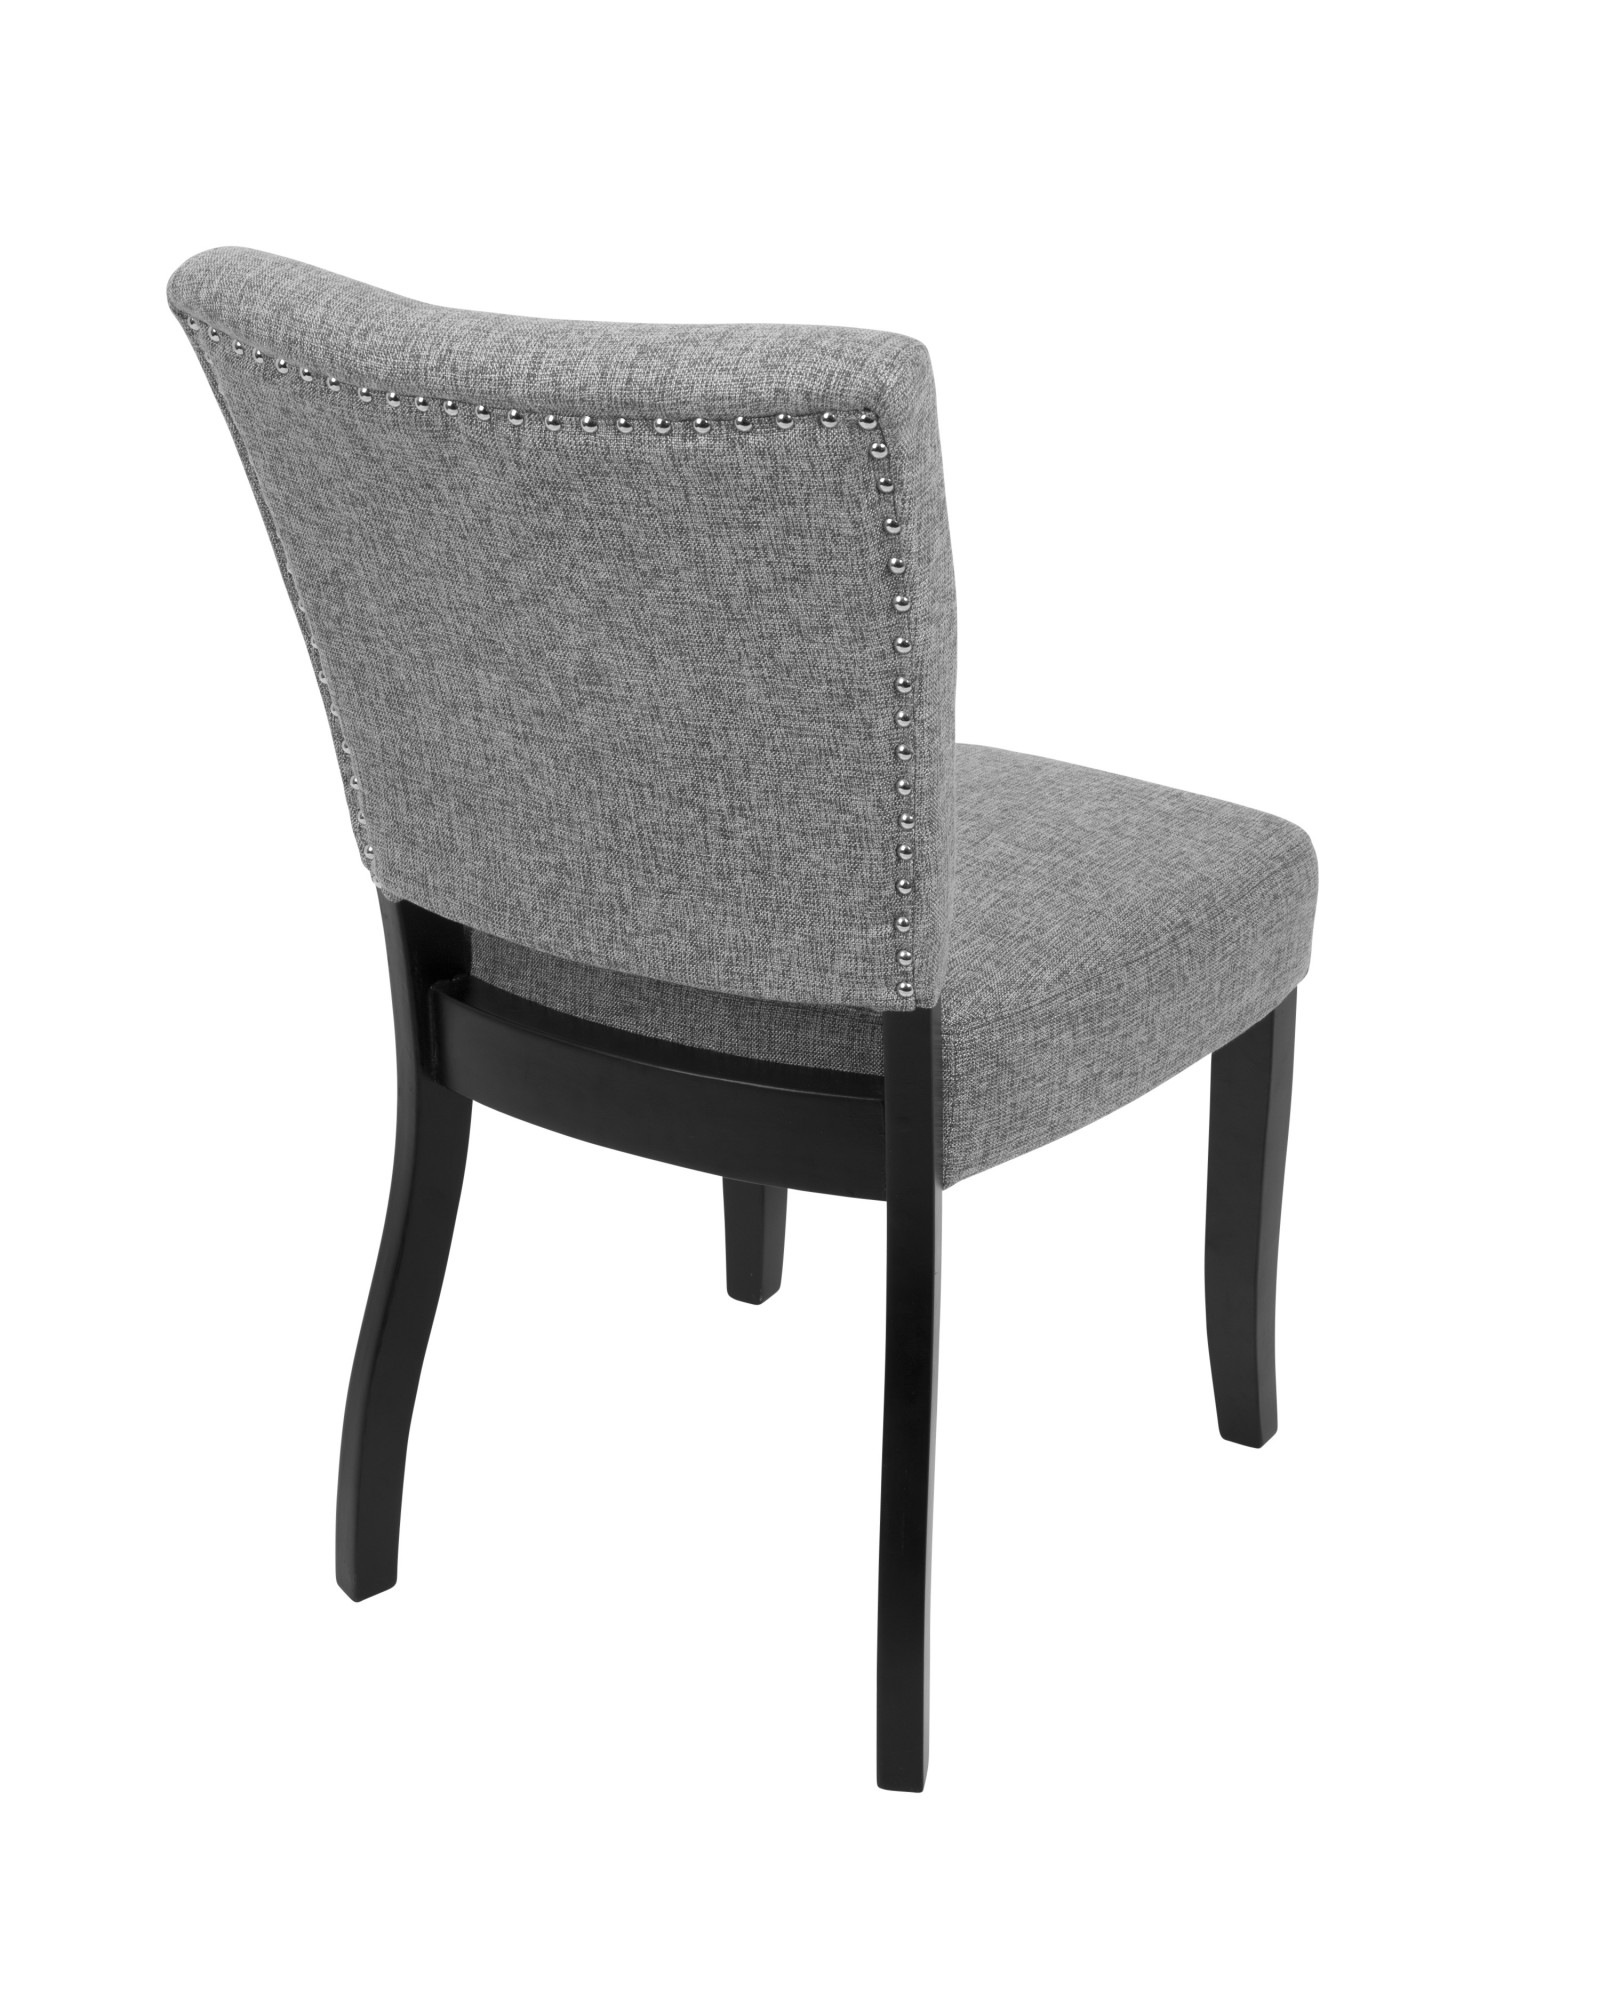 Vida Contemporary Dining Chair with Nailhead Trim in Espresso and Light Grey - Set of 2